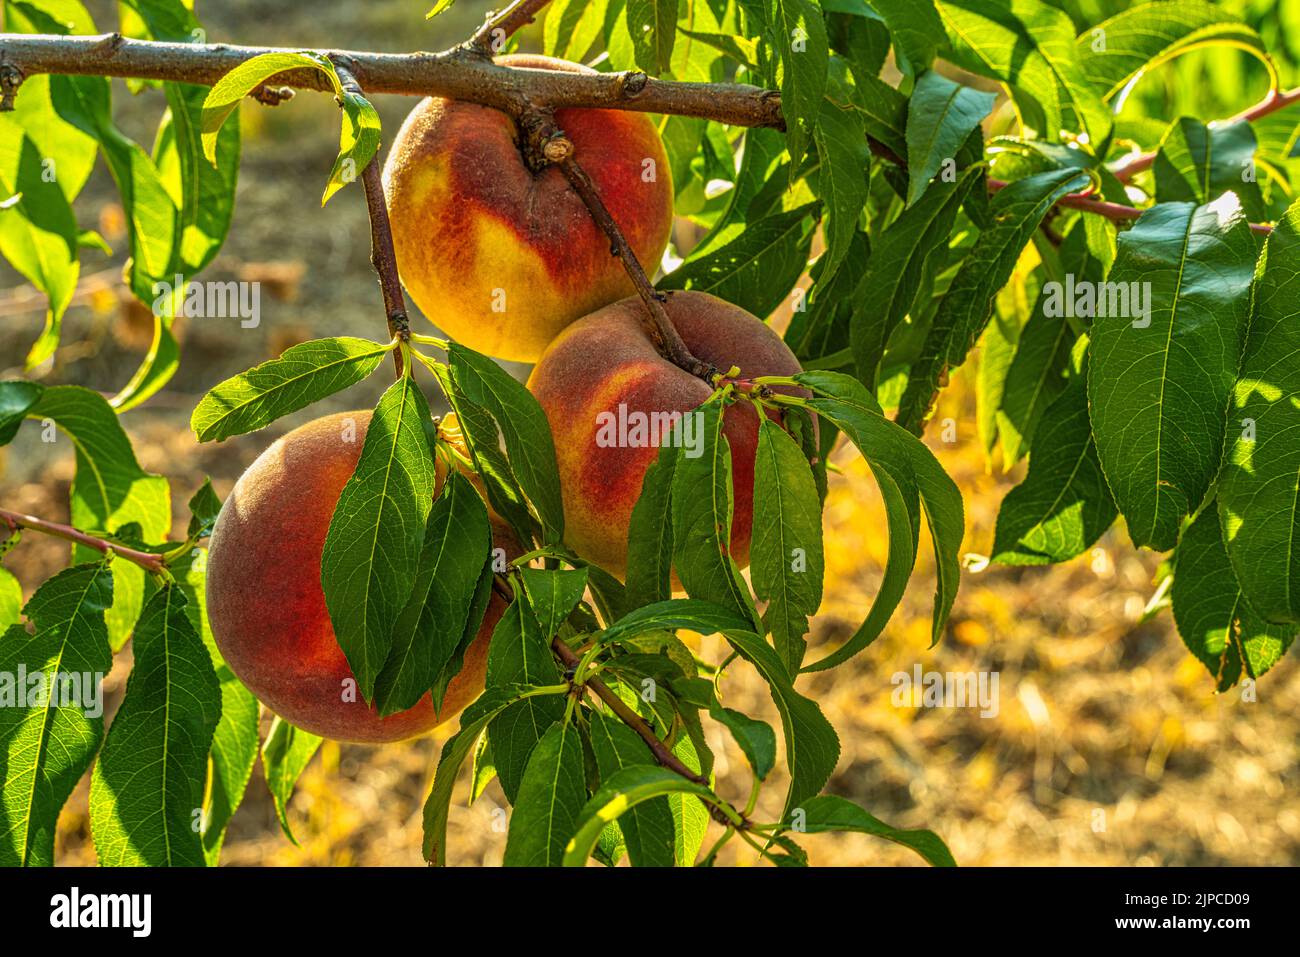 Percoca peach, variety of peach with compact yellow flesh and adherent to the seed. Cultivation from organic farming. Abruzzo, Italy, Europe Stock Photo